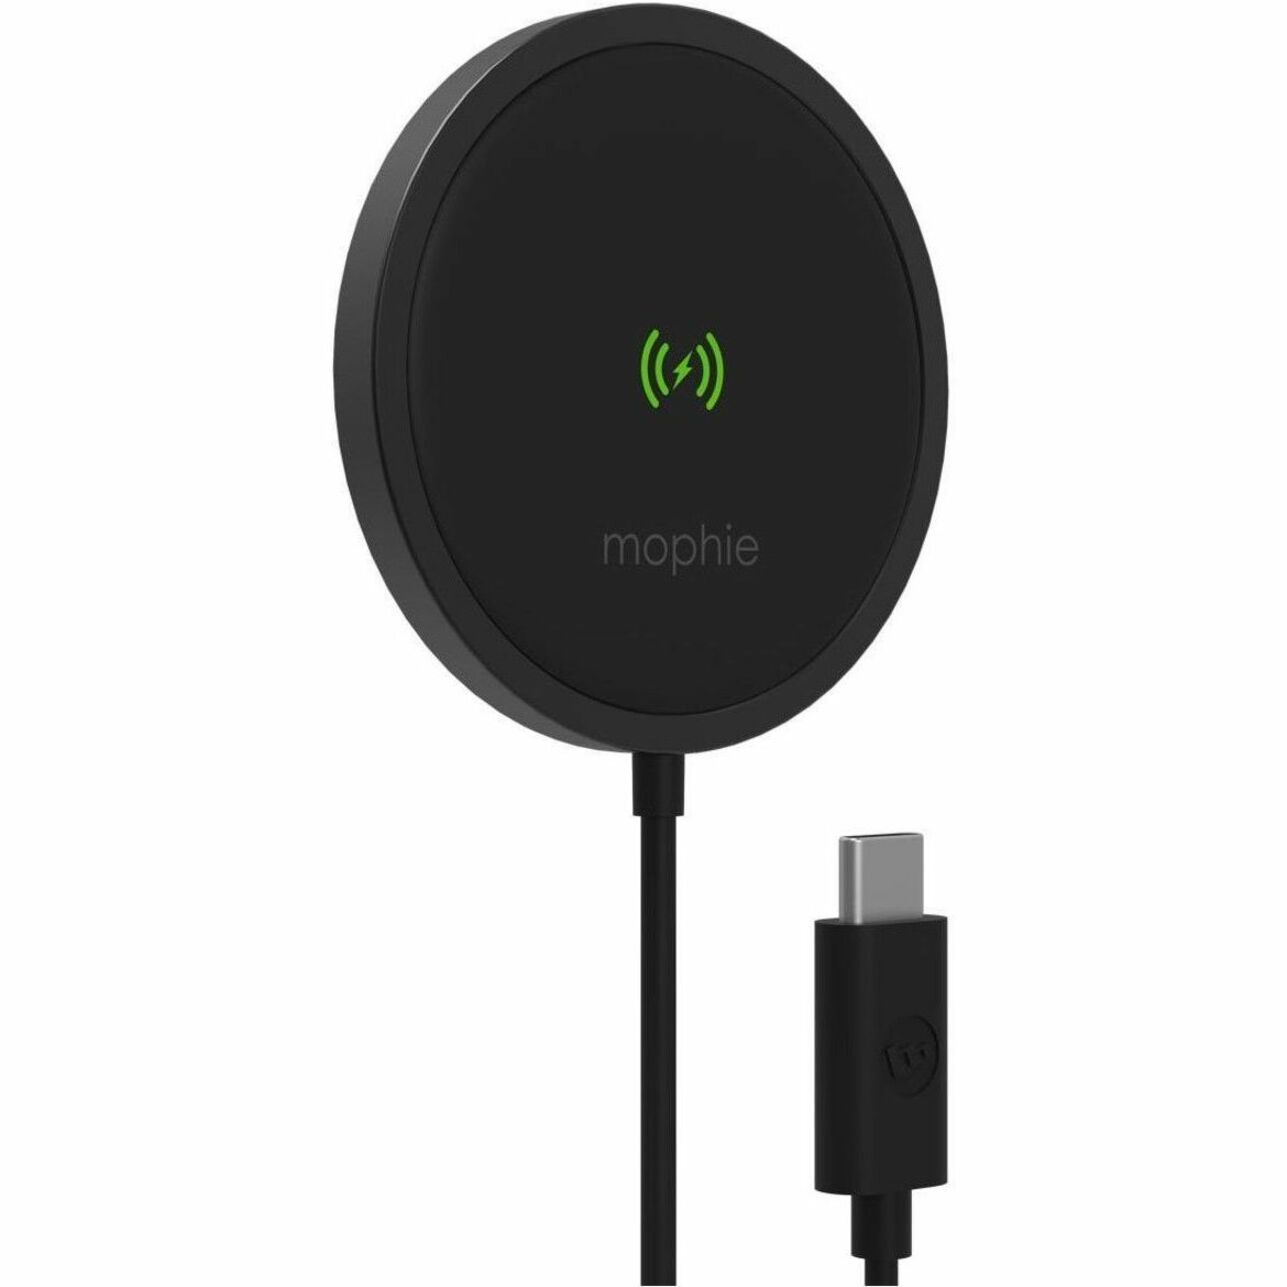 mophie 401307633 snap+ Induction Charger, Magnetic Charging Solution